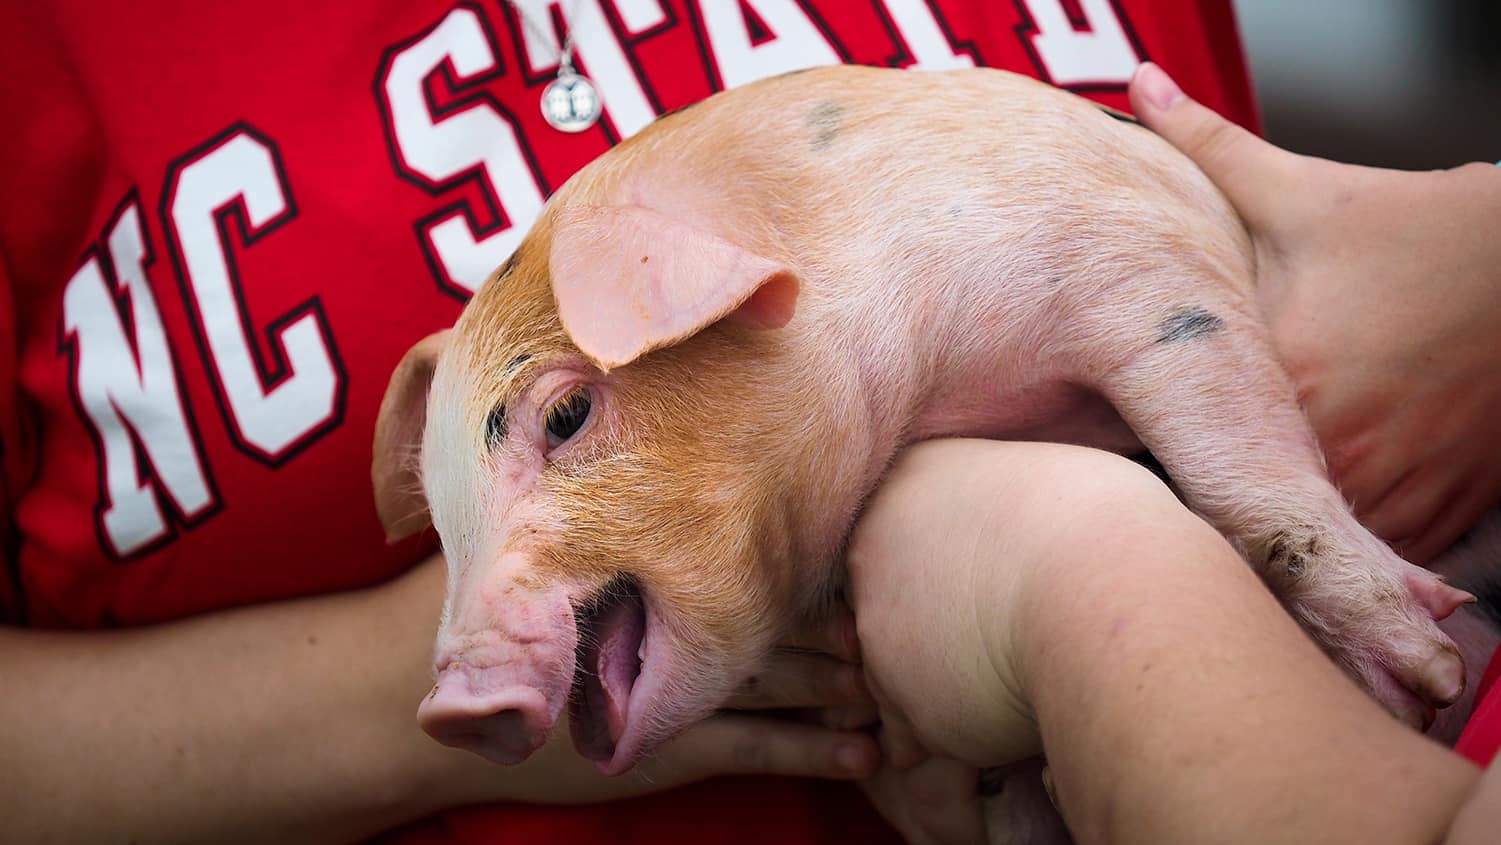 A squealing piglet in the arms of an NC State student.